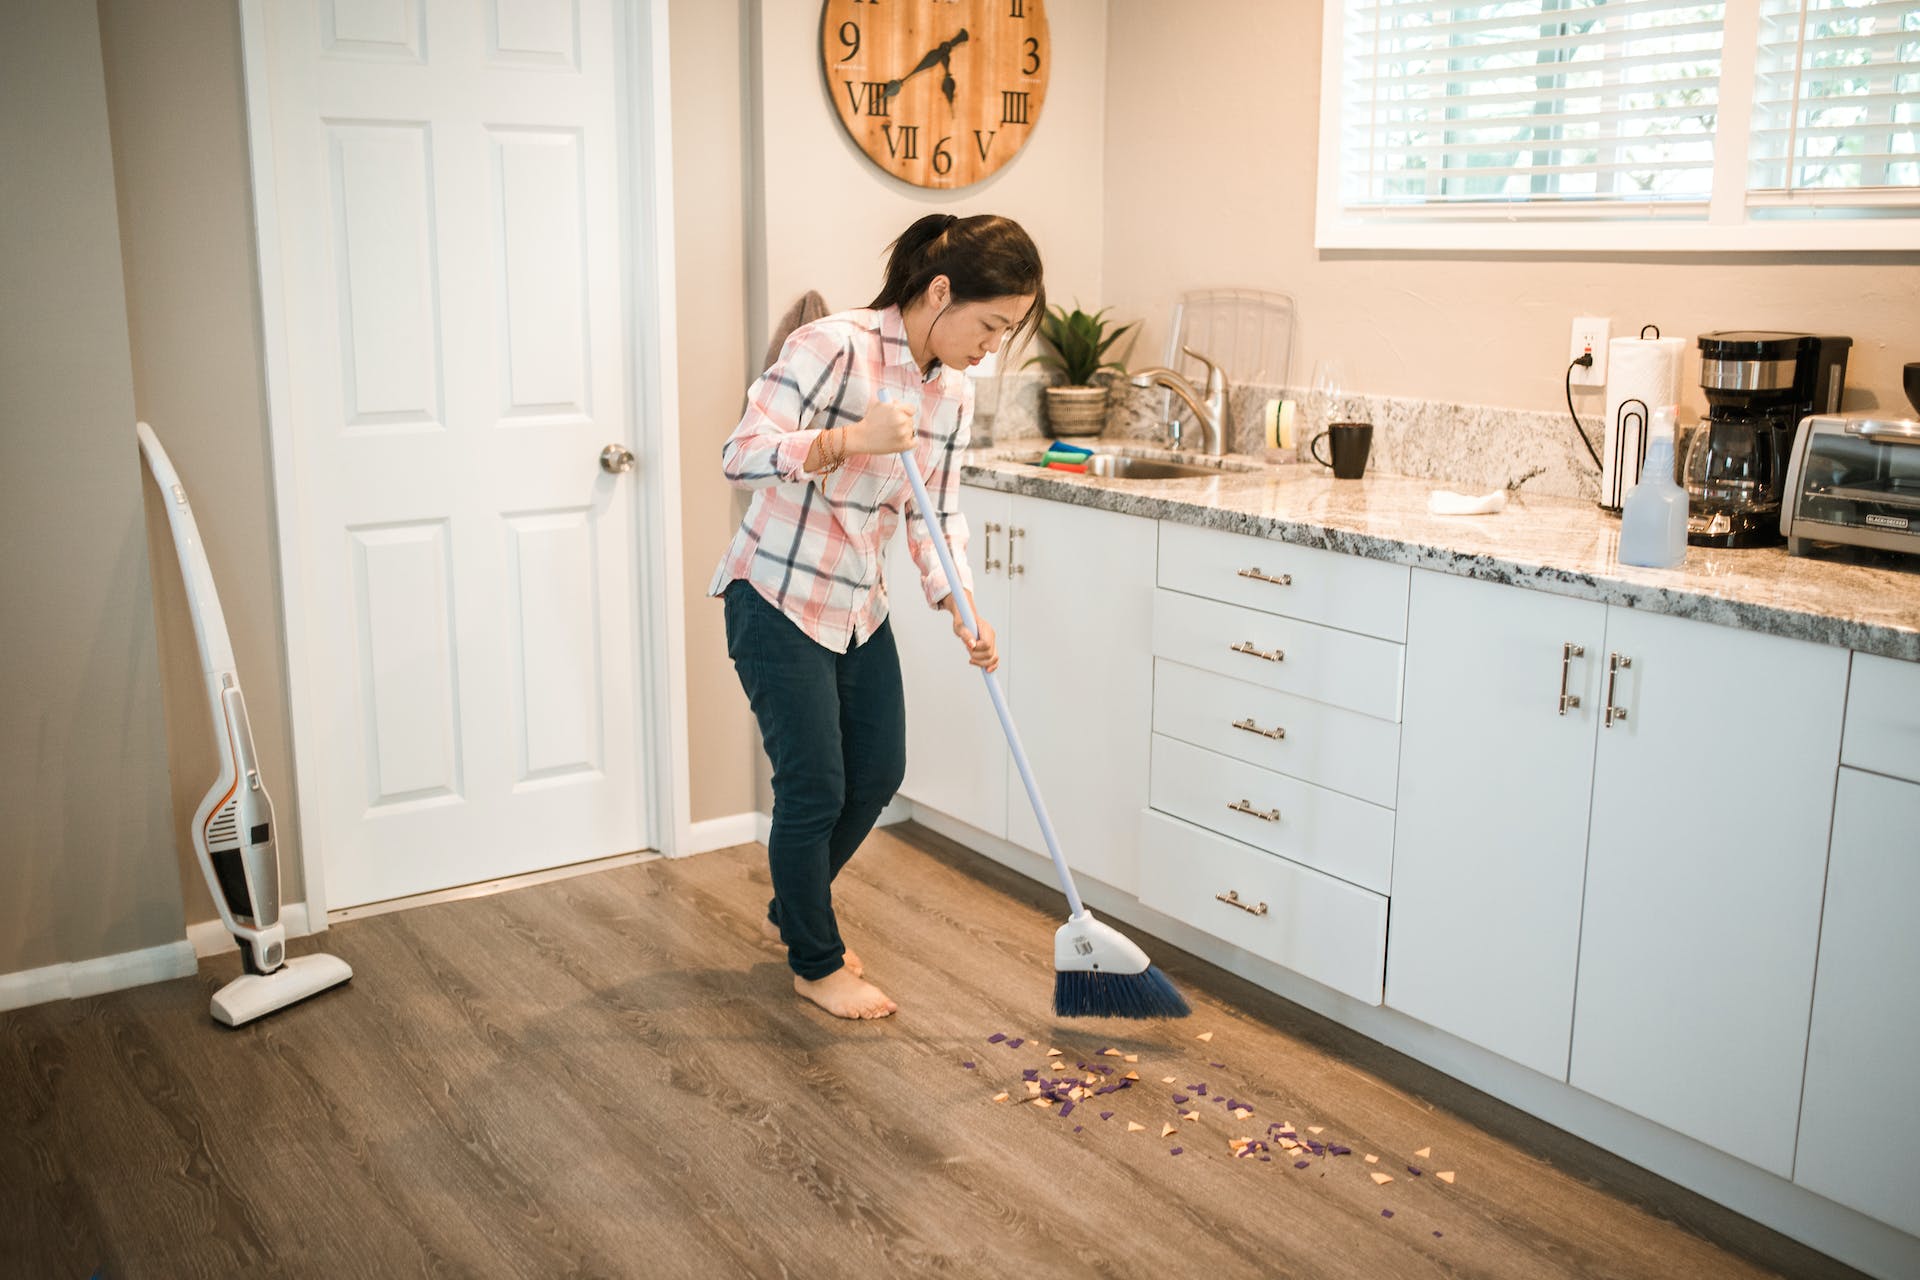 Photograph of a Woman in a Plaid Shirt Sweeping with a White Broom